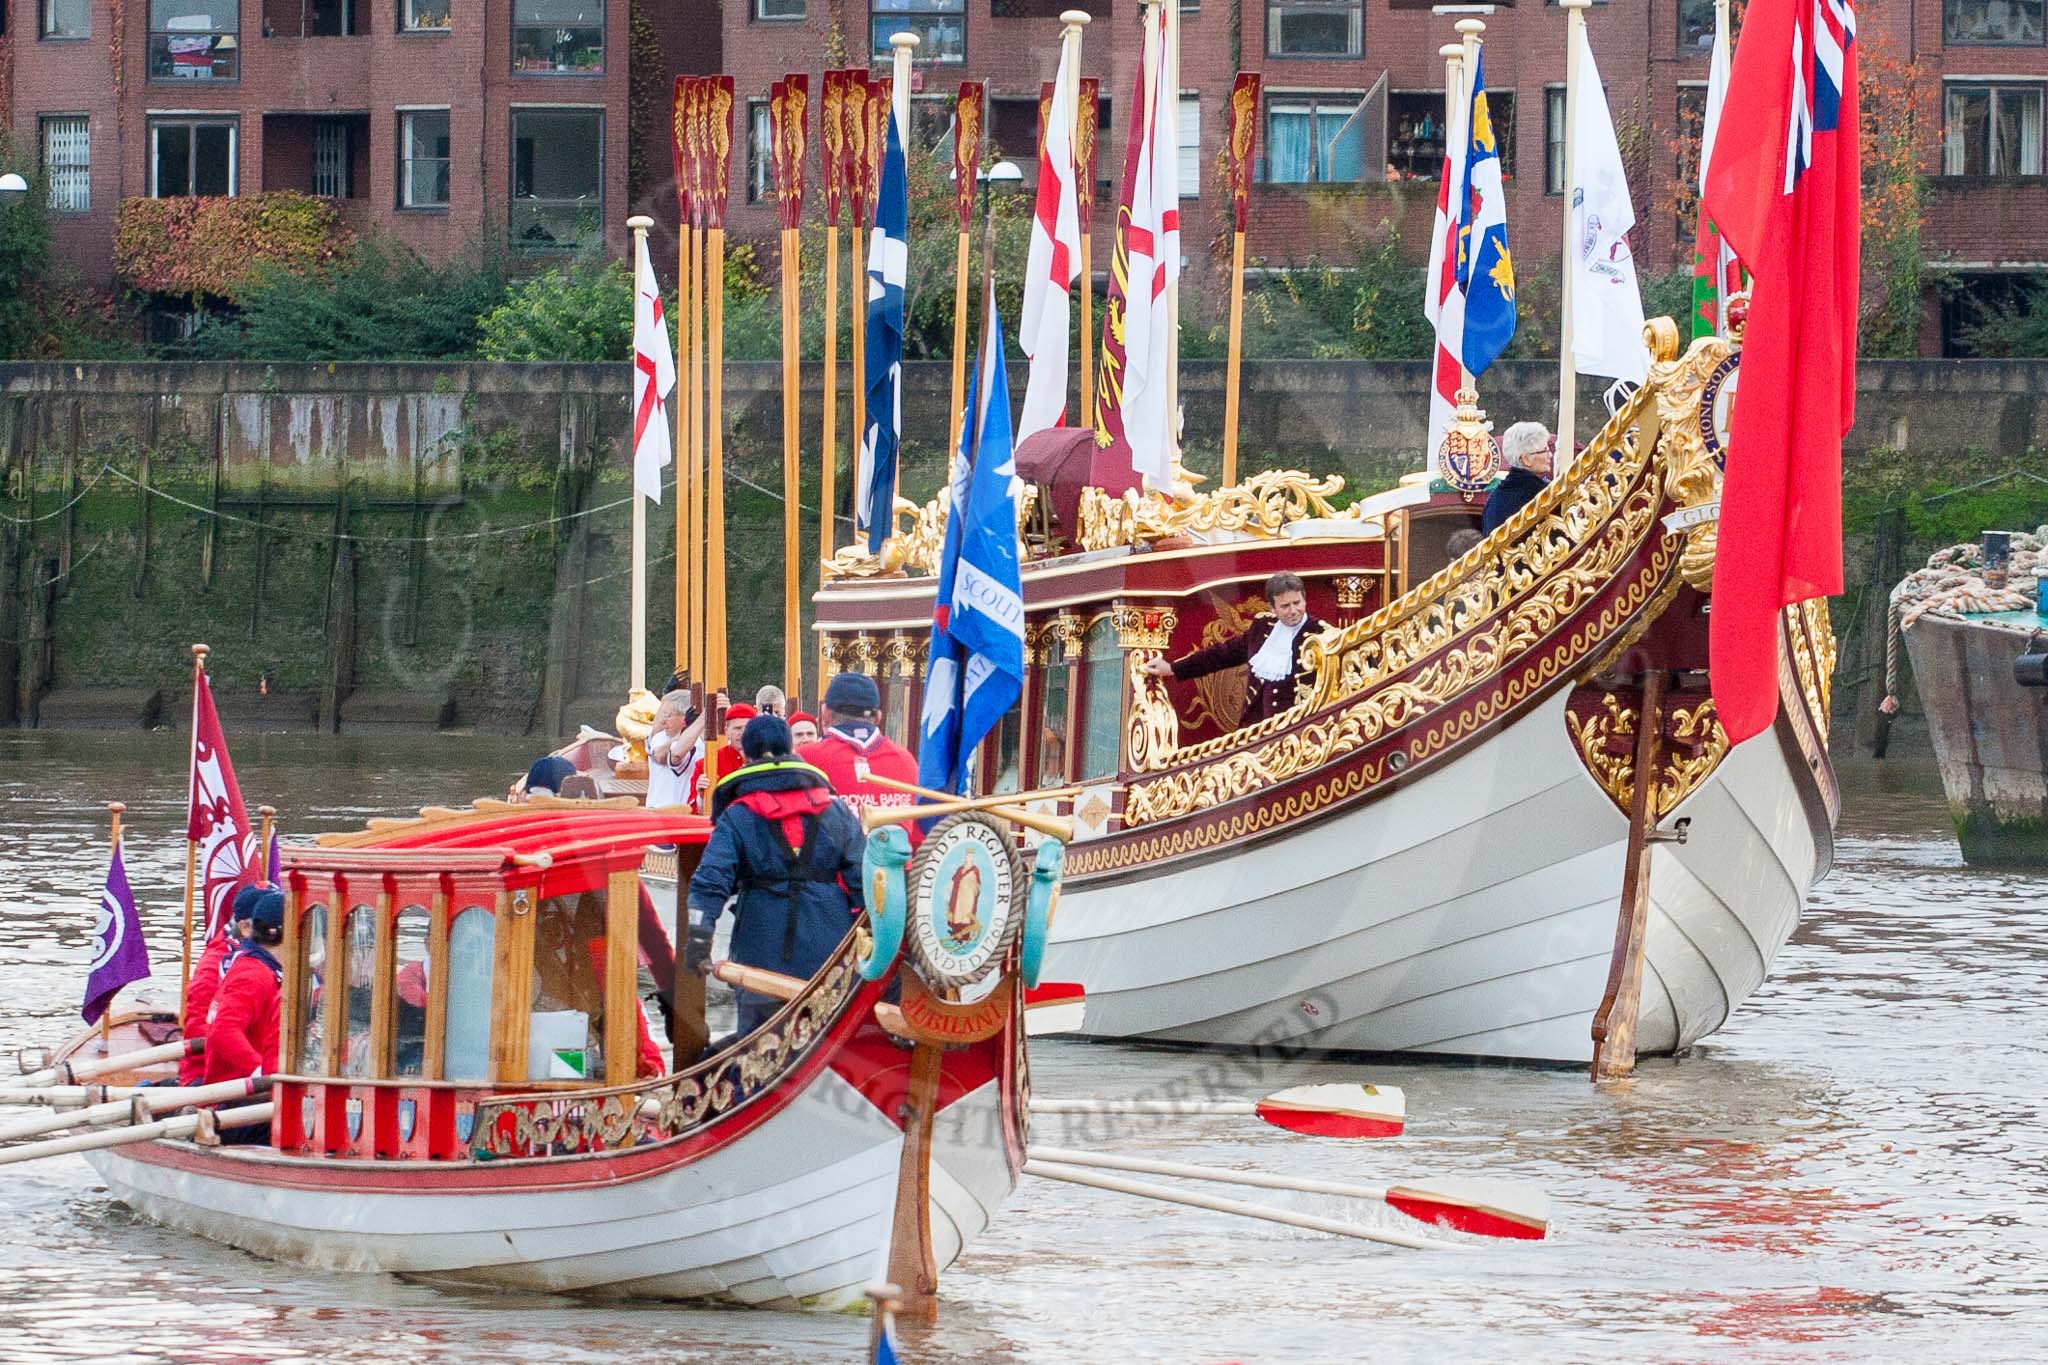 Lord Mayor's Show 2013: The Queen's Row Barge Gloriana leading the Lord Mayor's flotilla down the Thames from Westminster to the City. Photo by Mike Garland..




on 09 November 2013 at 08:40, image #13